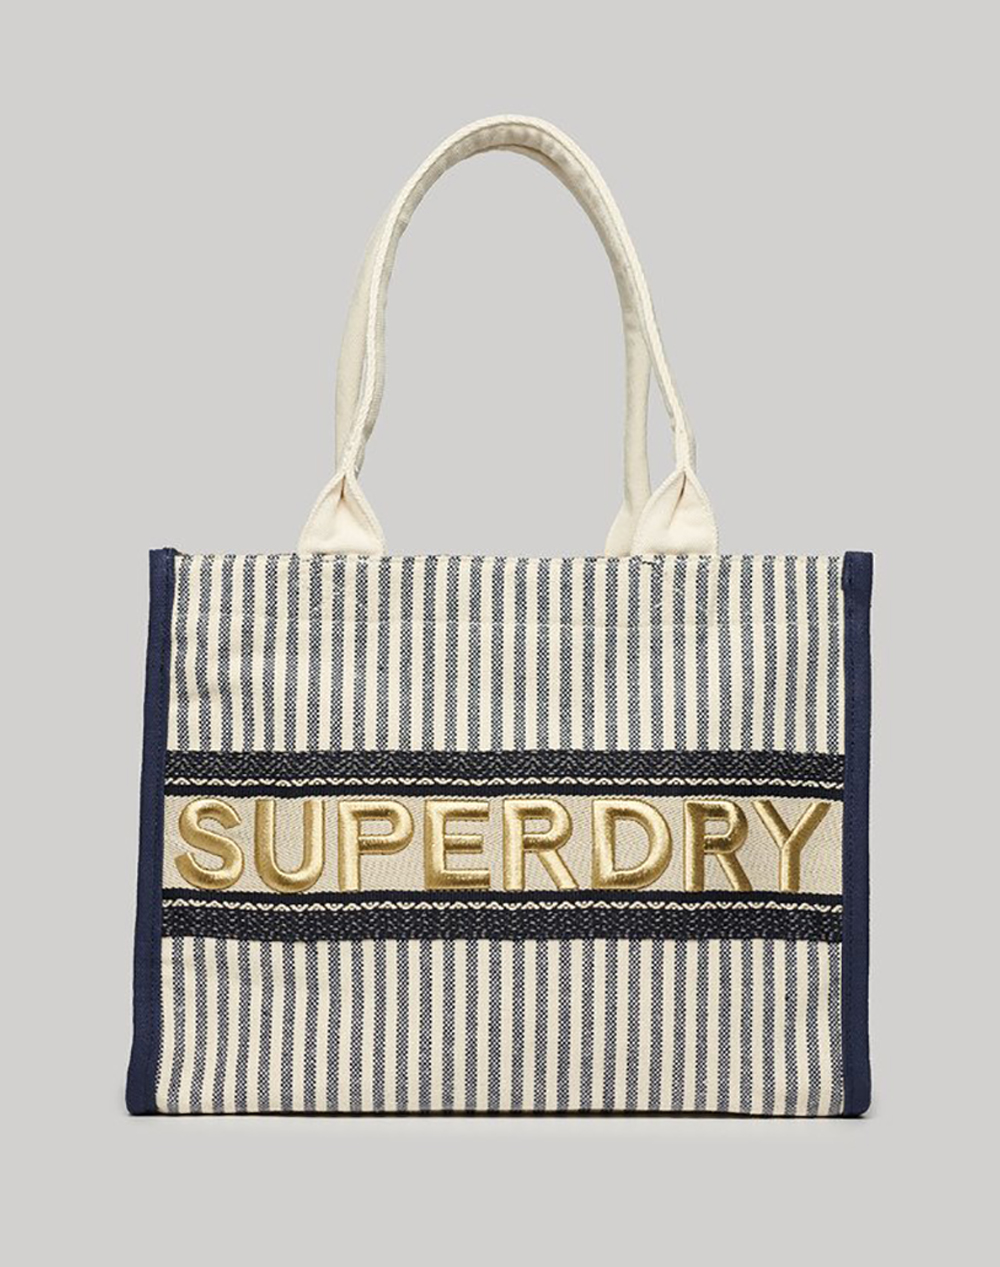 SUPERDRY D2 SDRY LUXE TOTE BAG ΤΣΑΝΤΑ ΓΥΝΑΙΚΕΙΟ (Διαστάσεις: 32 x 38 x 15 εκ) W9110381A-JKC NavyBlue